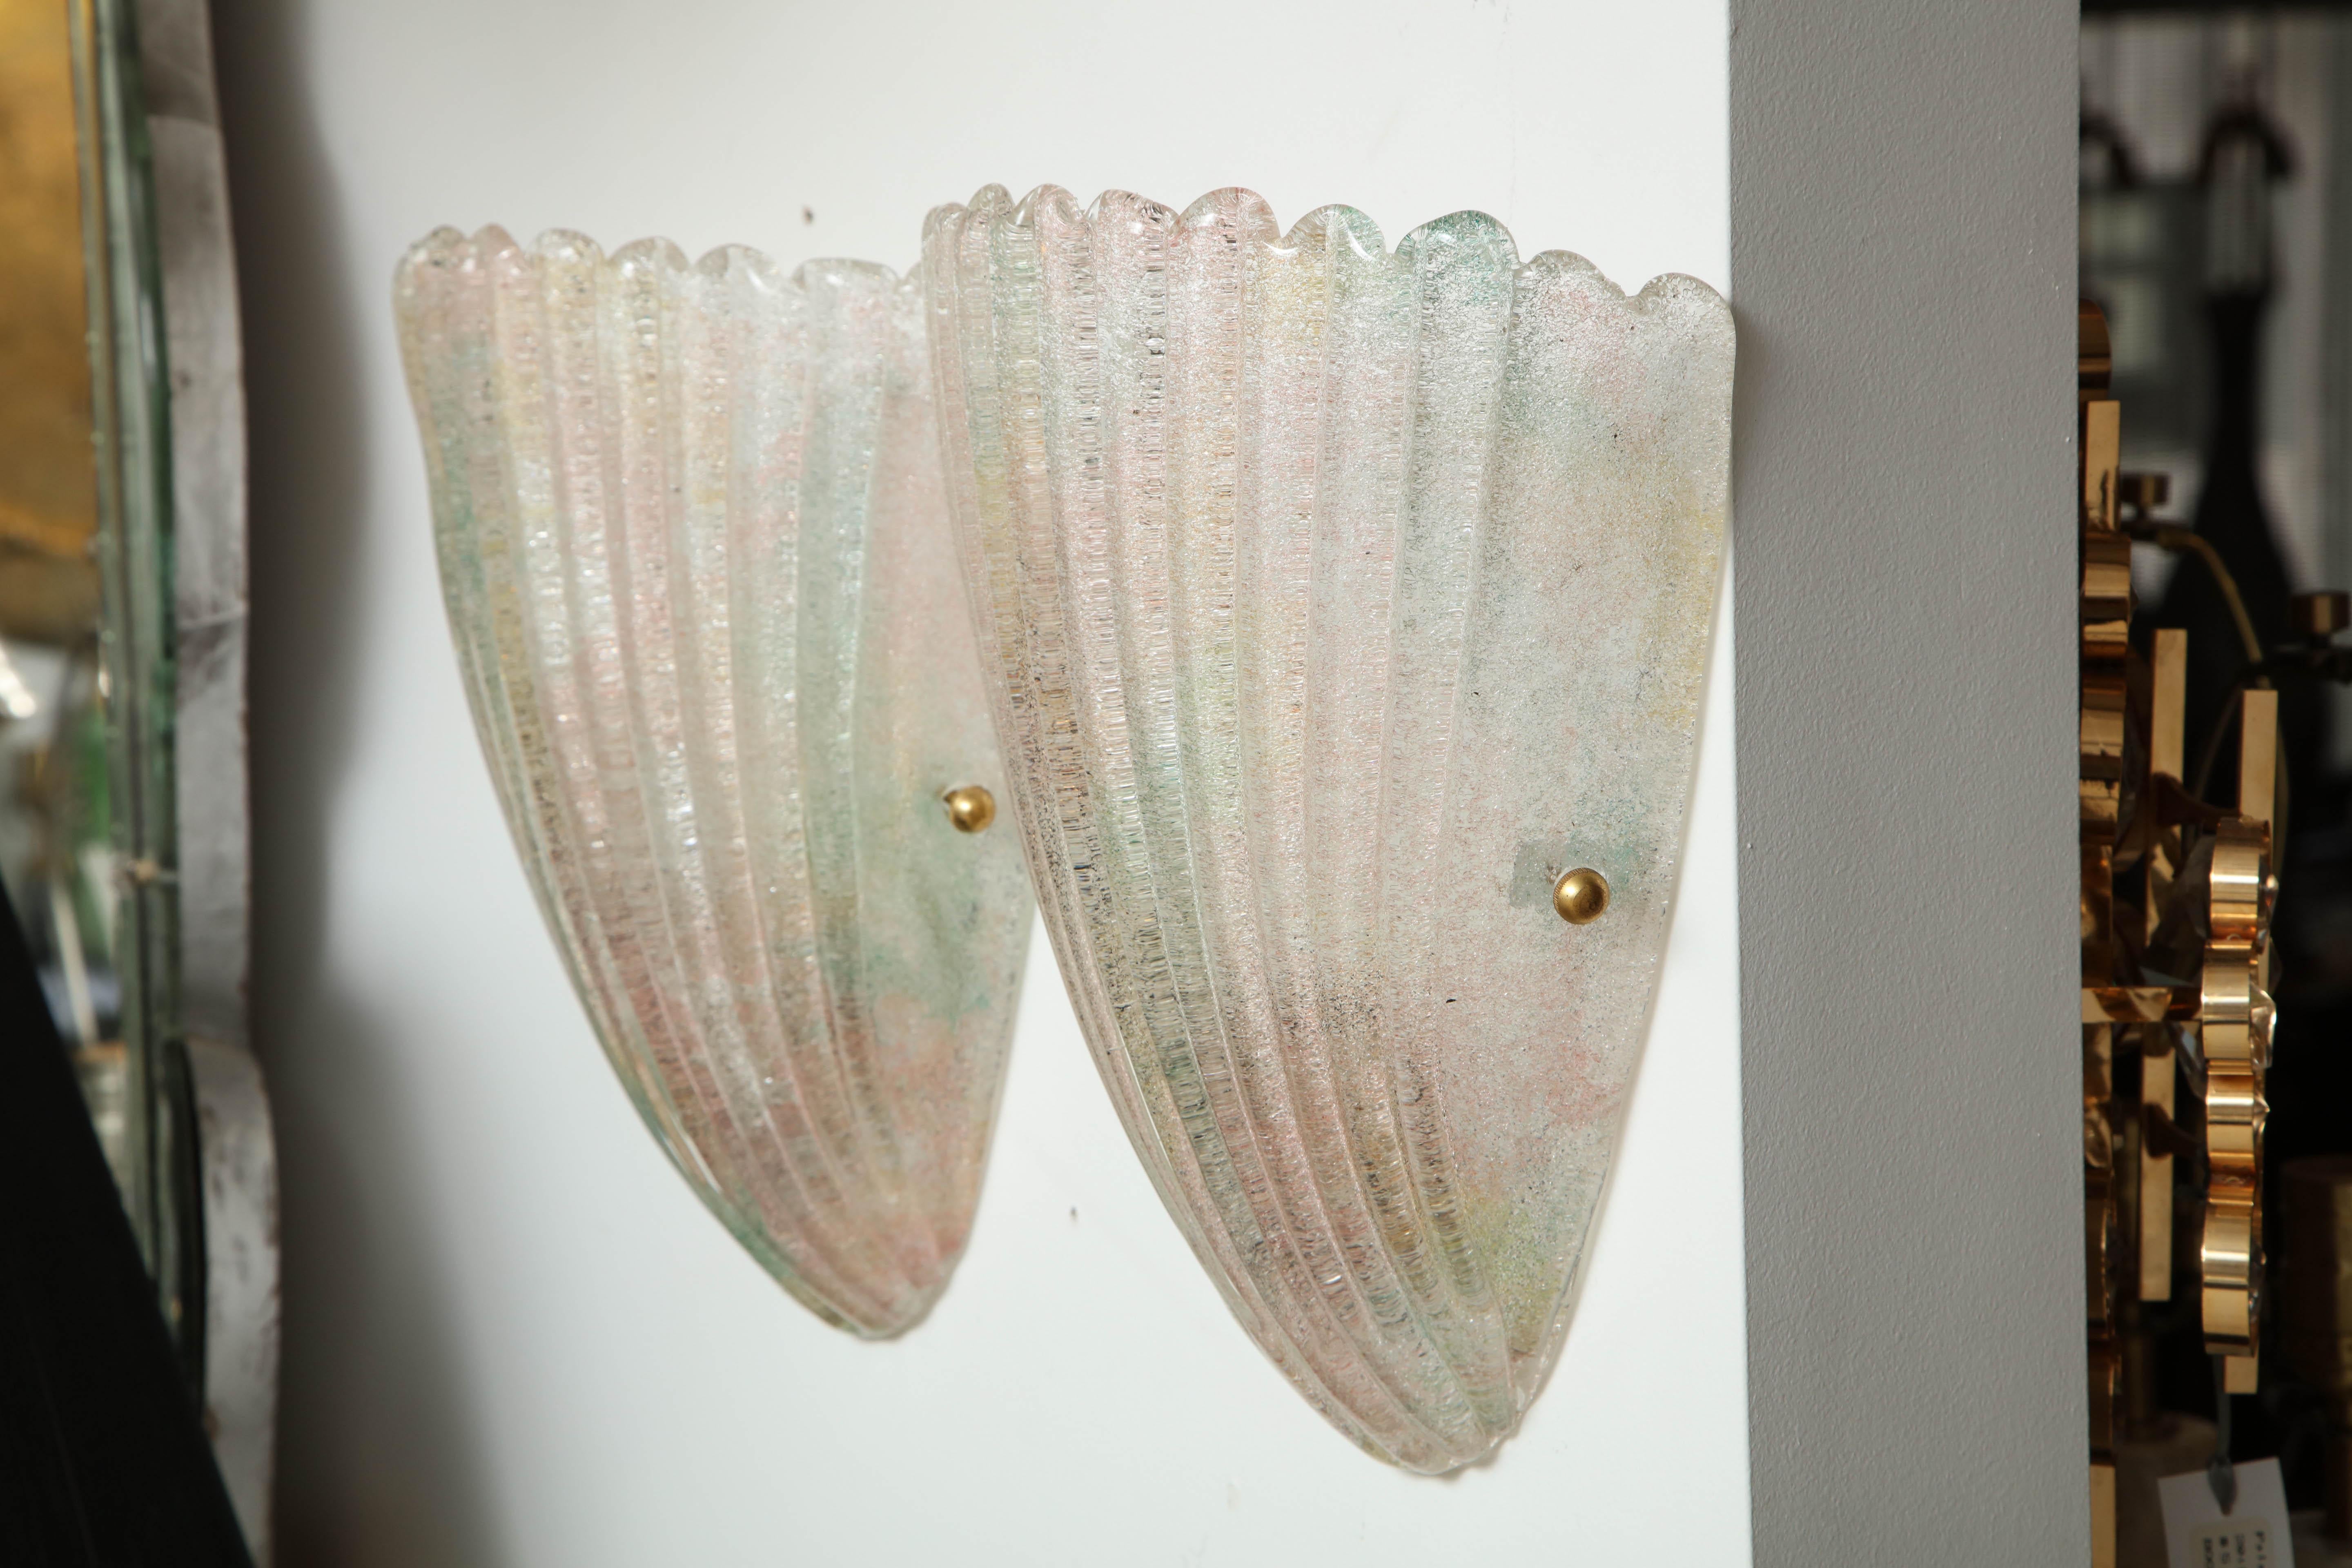 Mid-Century Modern Murano Glass Shell Sconces, 1 of 2 pairs